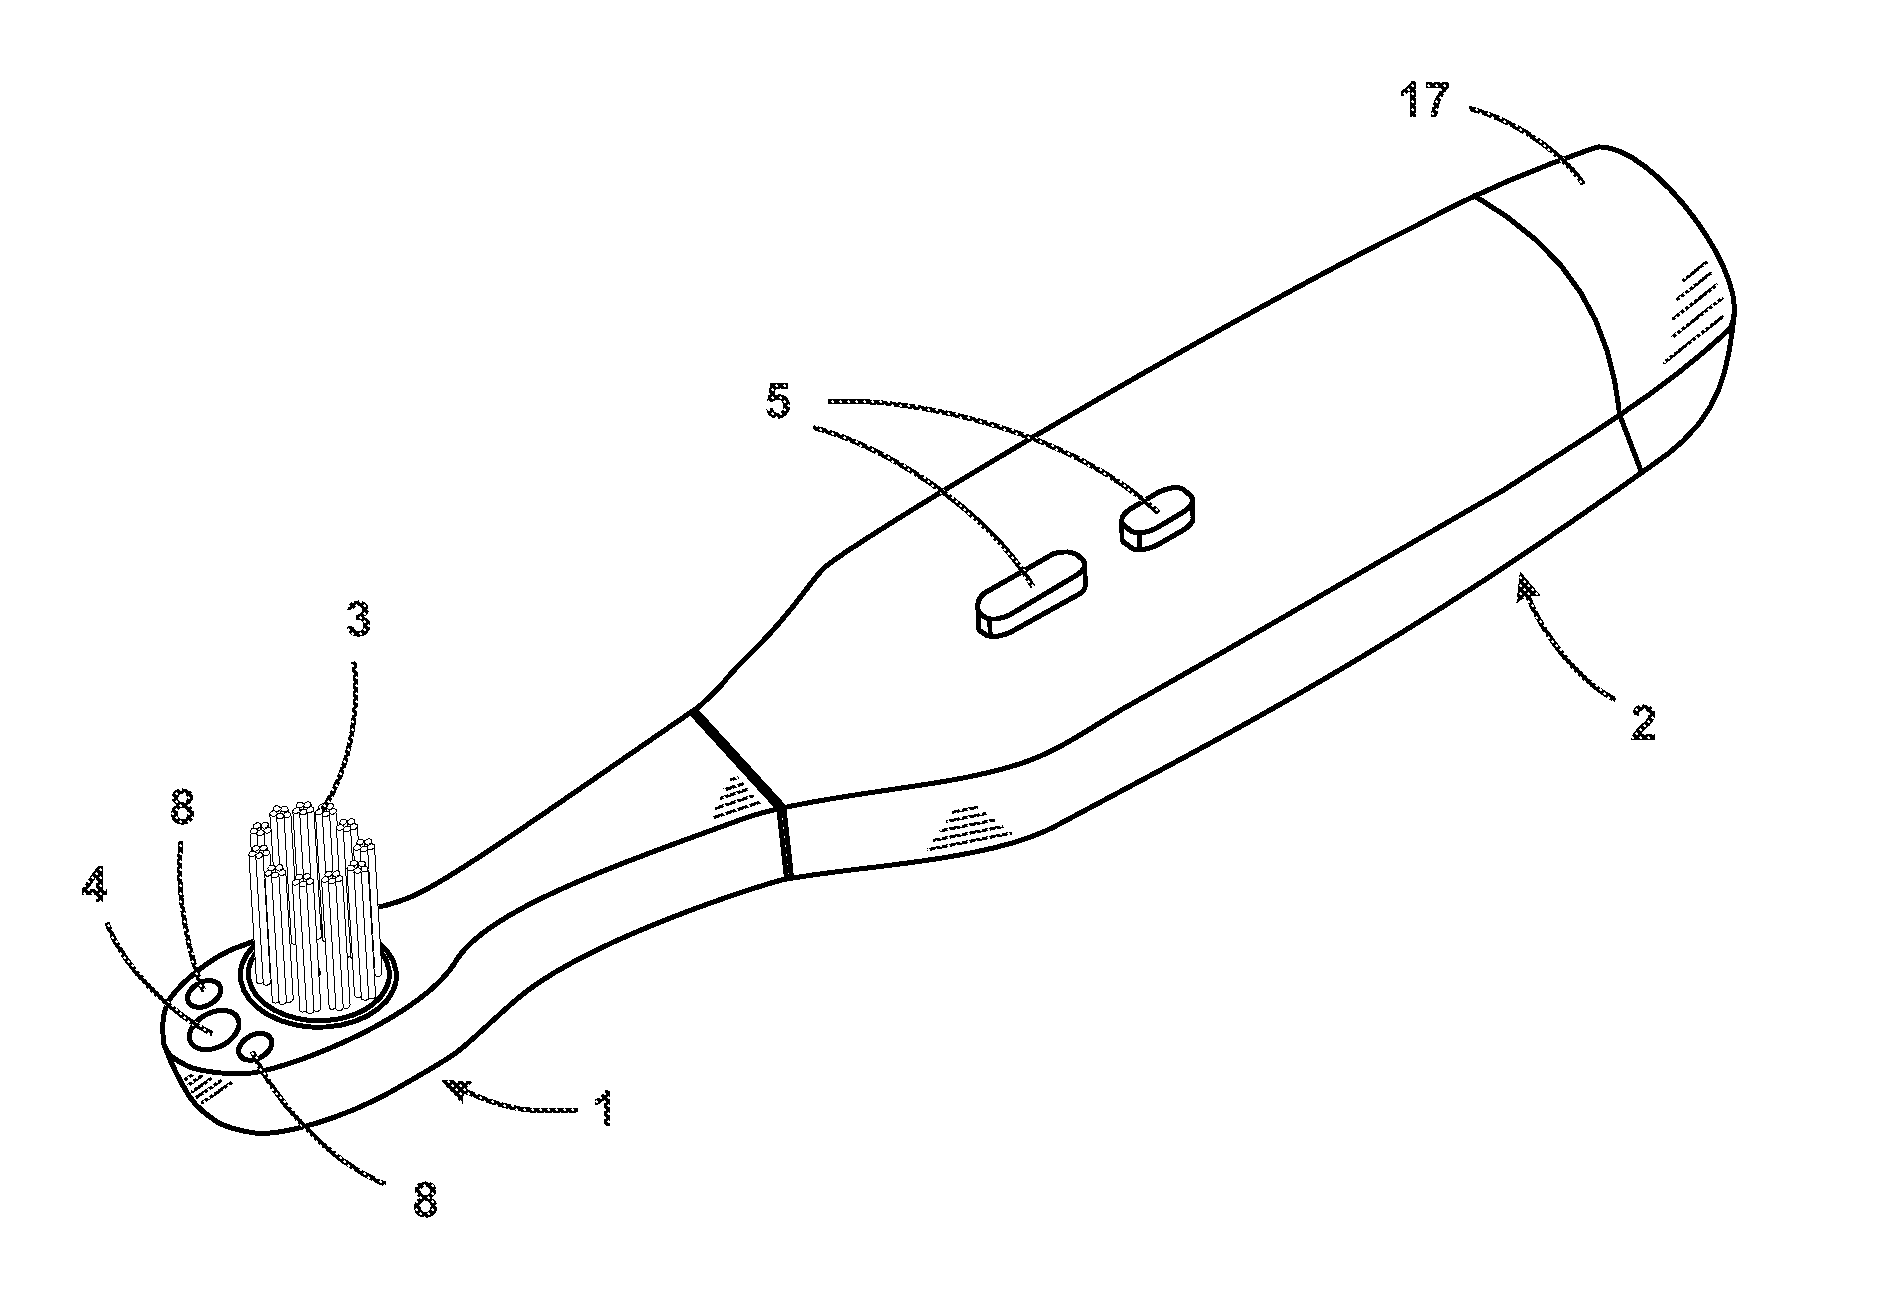 Toothbrush with an imaging device being camera